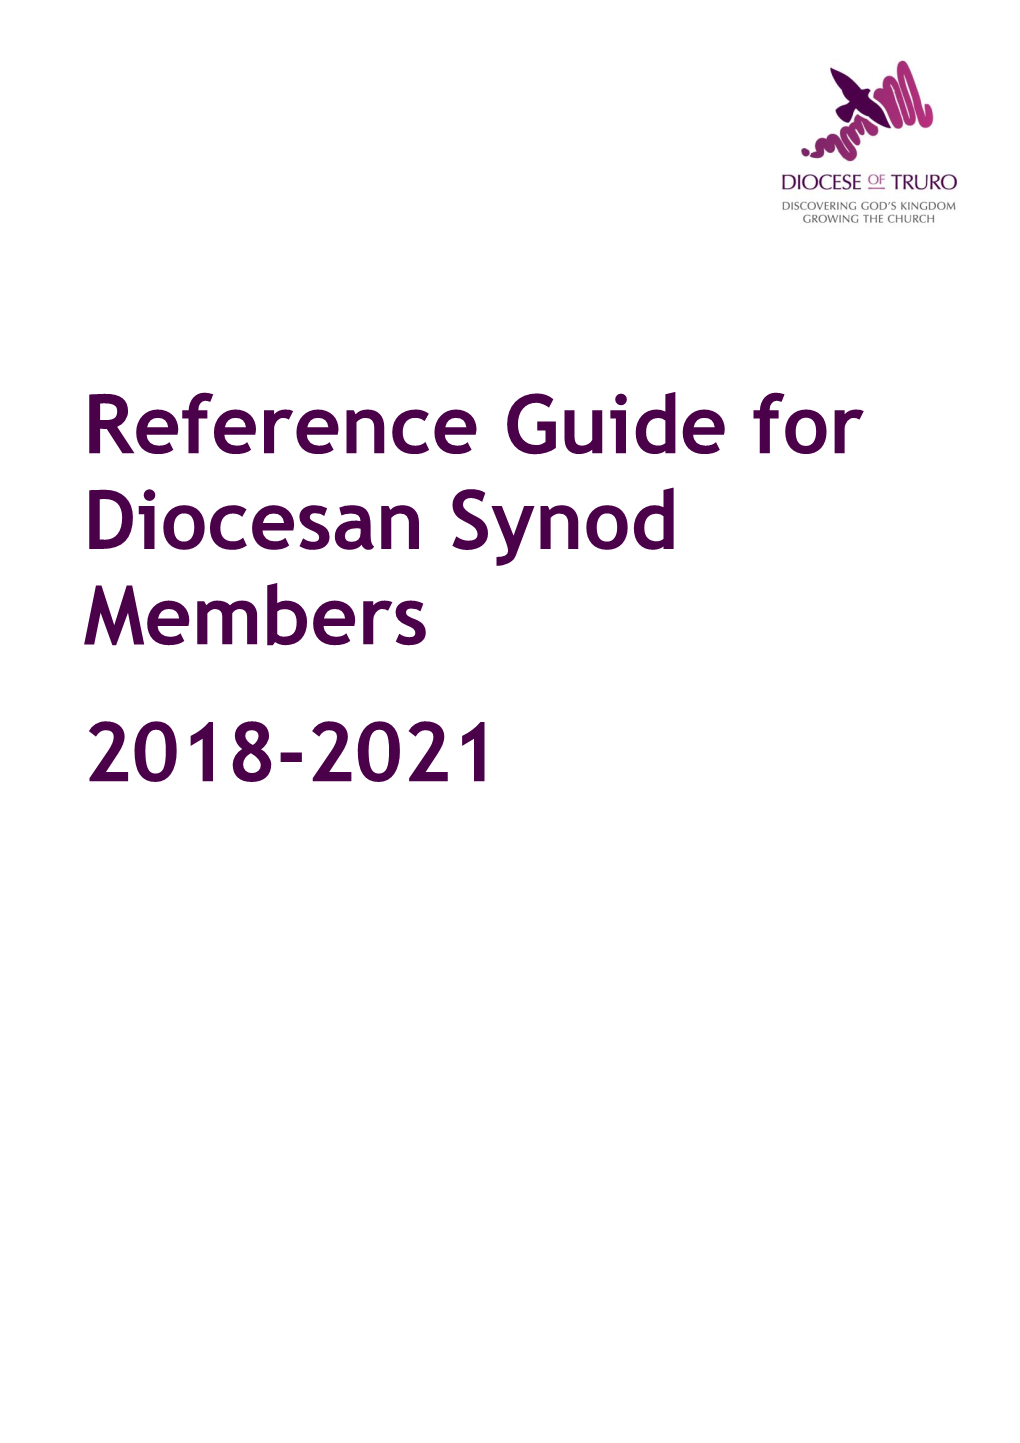 Reference Guide for Diocesan Synod Members 2018-2021